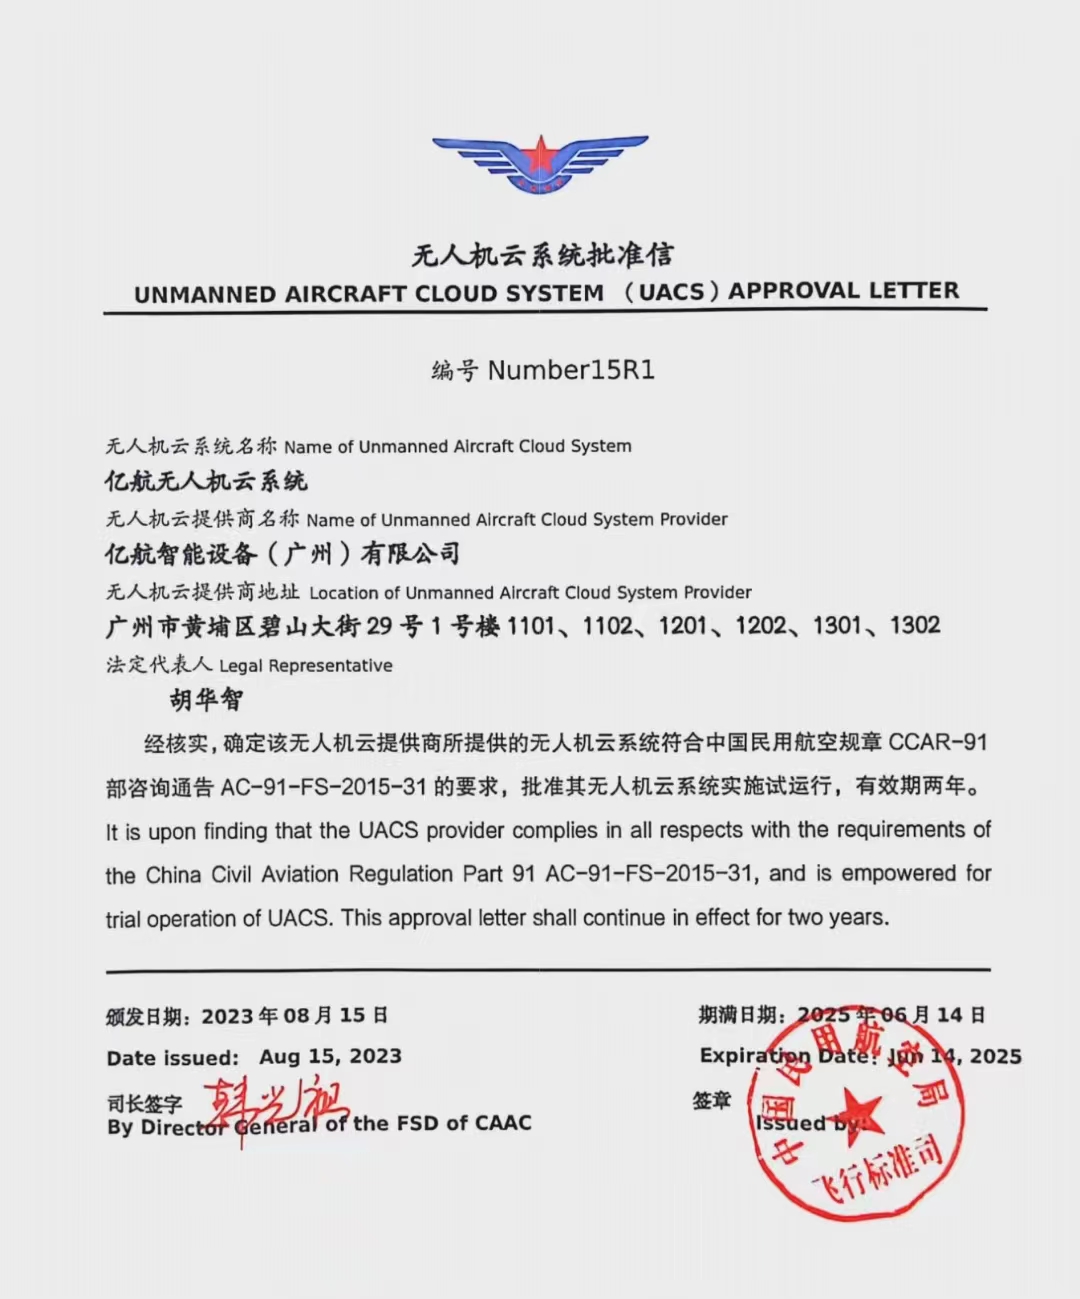 EHang UACS Approval Letter issued by the CAAC